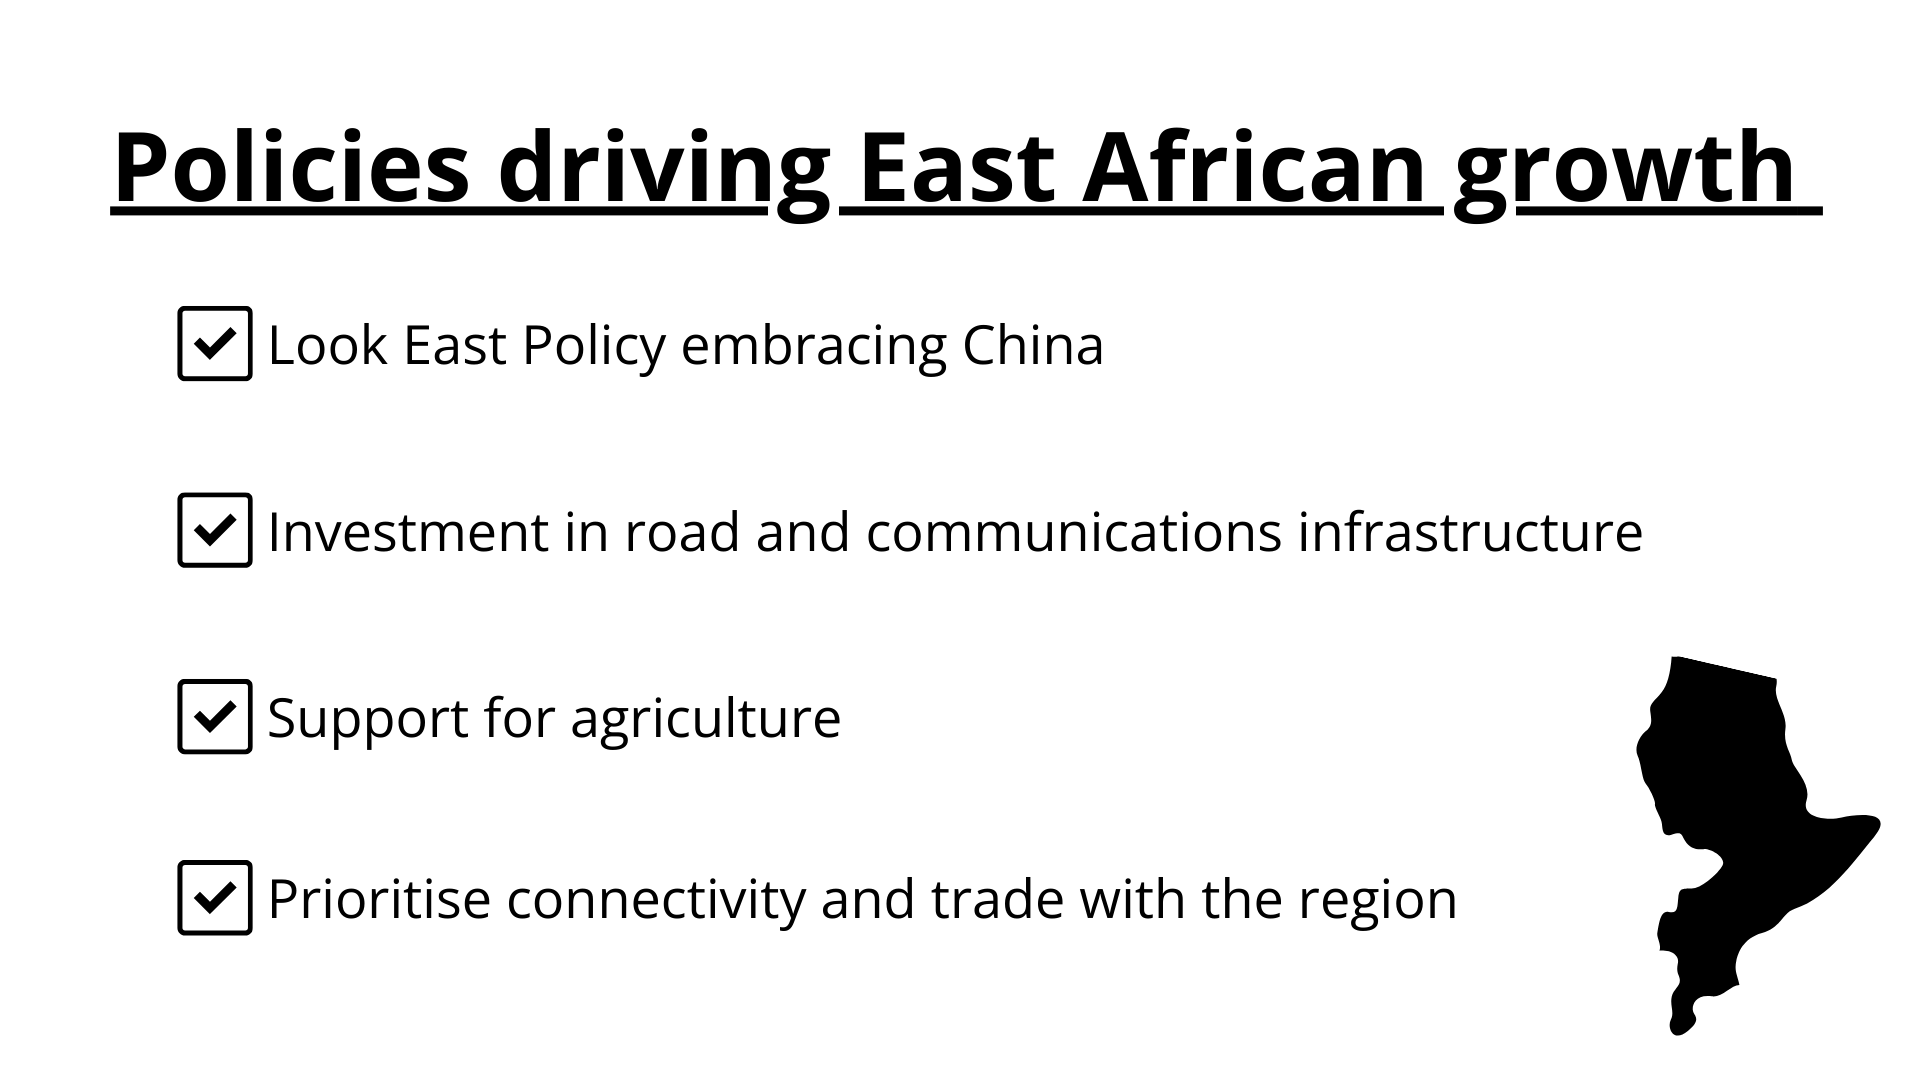 Policies driving East African growth